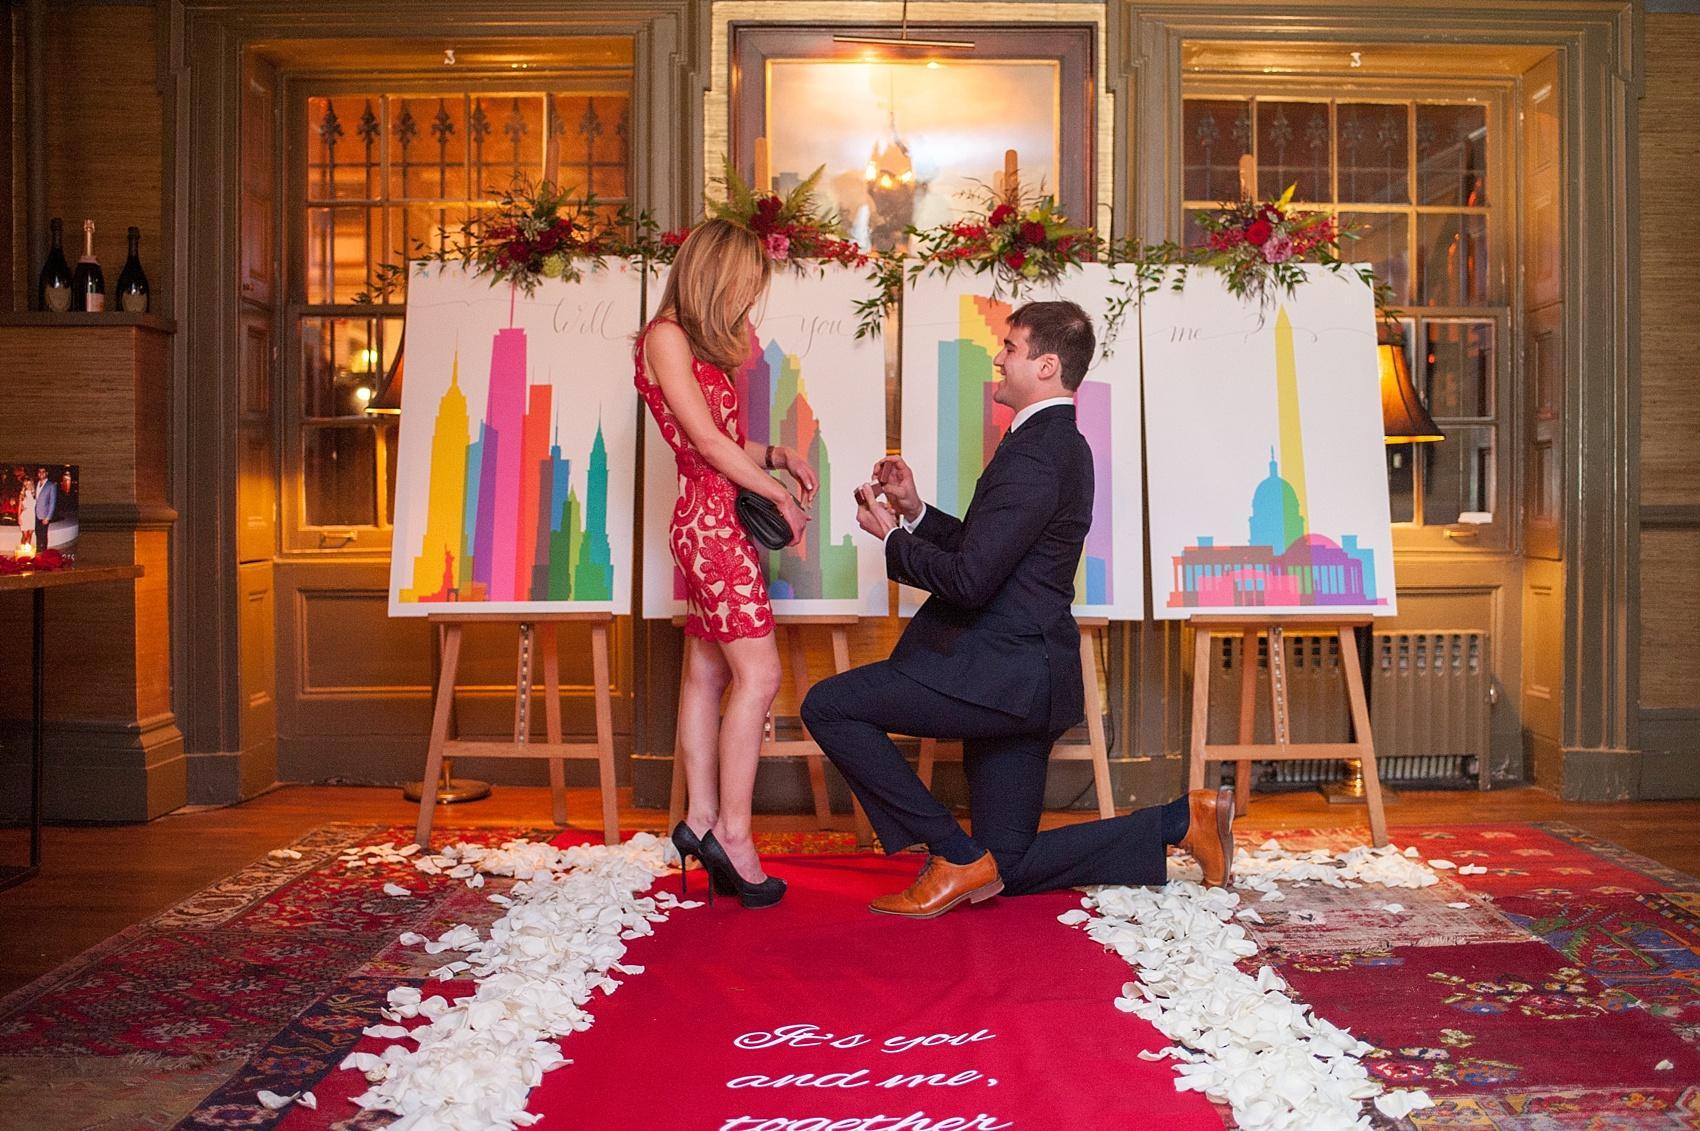 NYC proposal ideas with custom city paintings. Photos by Mikkel Paige Photography. Planning by Brilliant Event Planning and flowers by The Arrangement.